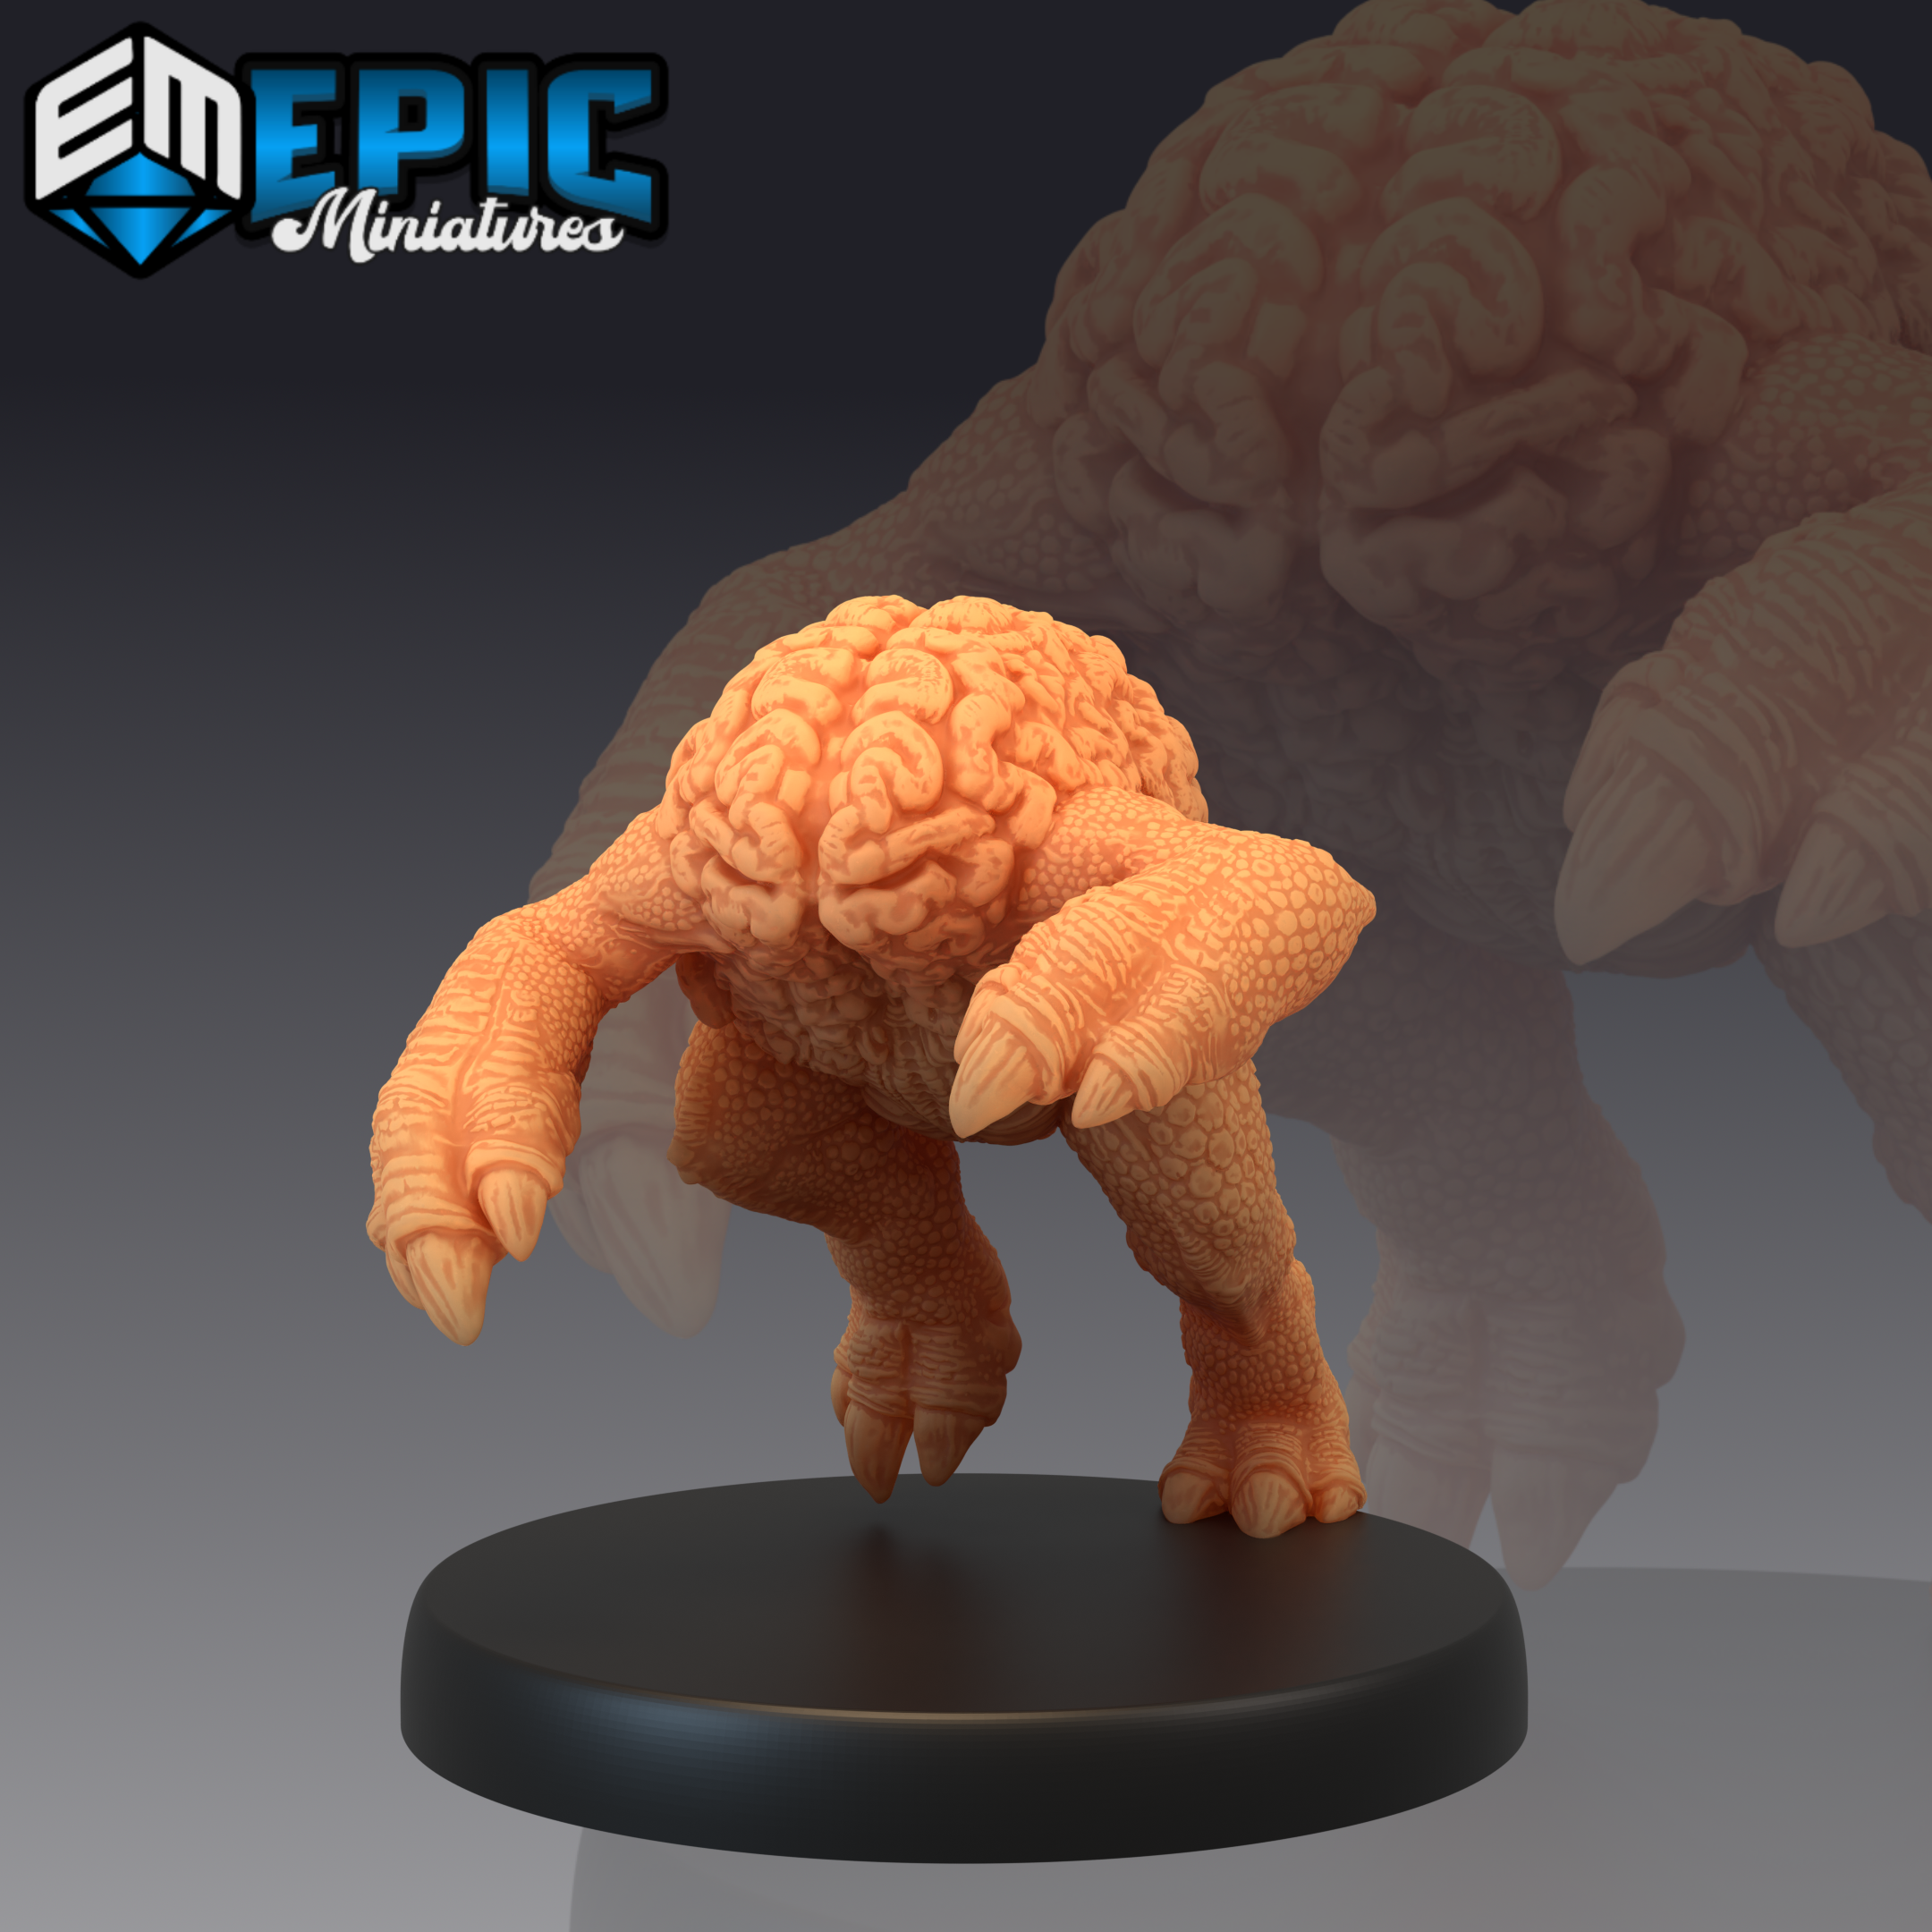 Crawling Monster Creature designed by Epic Miniatures